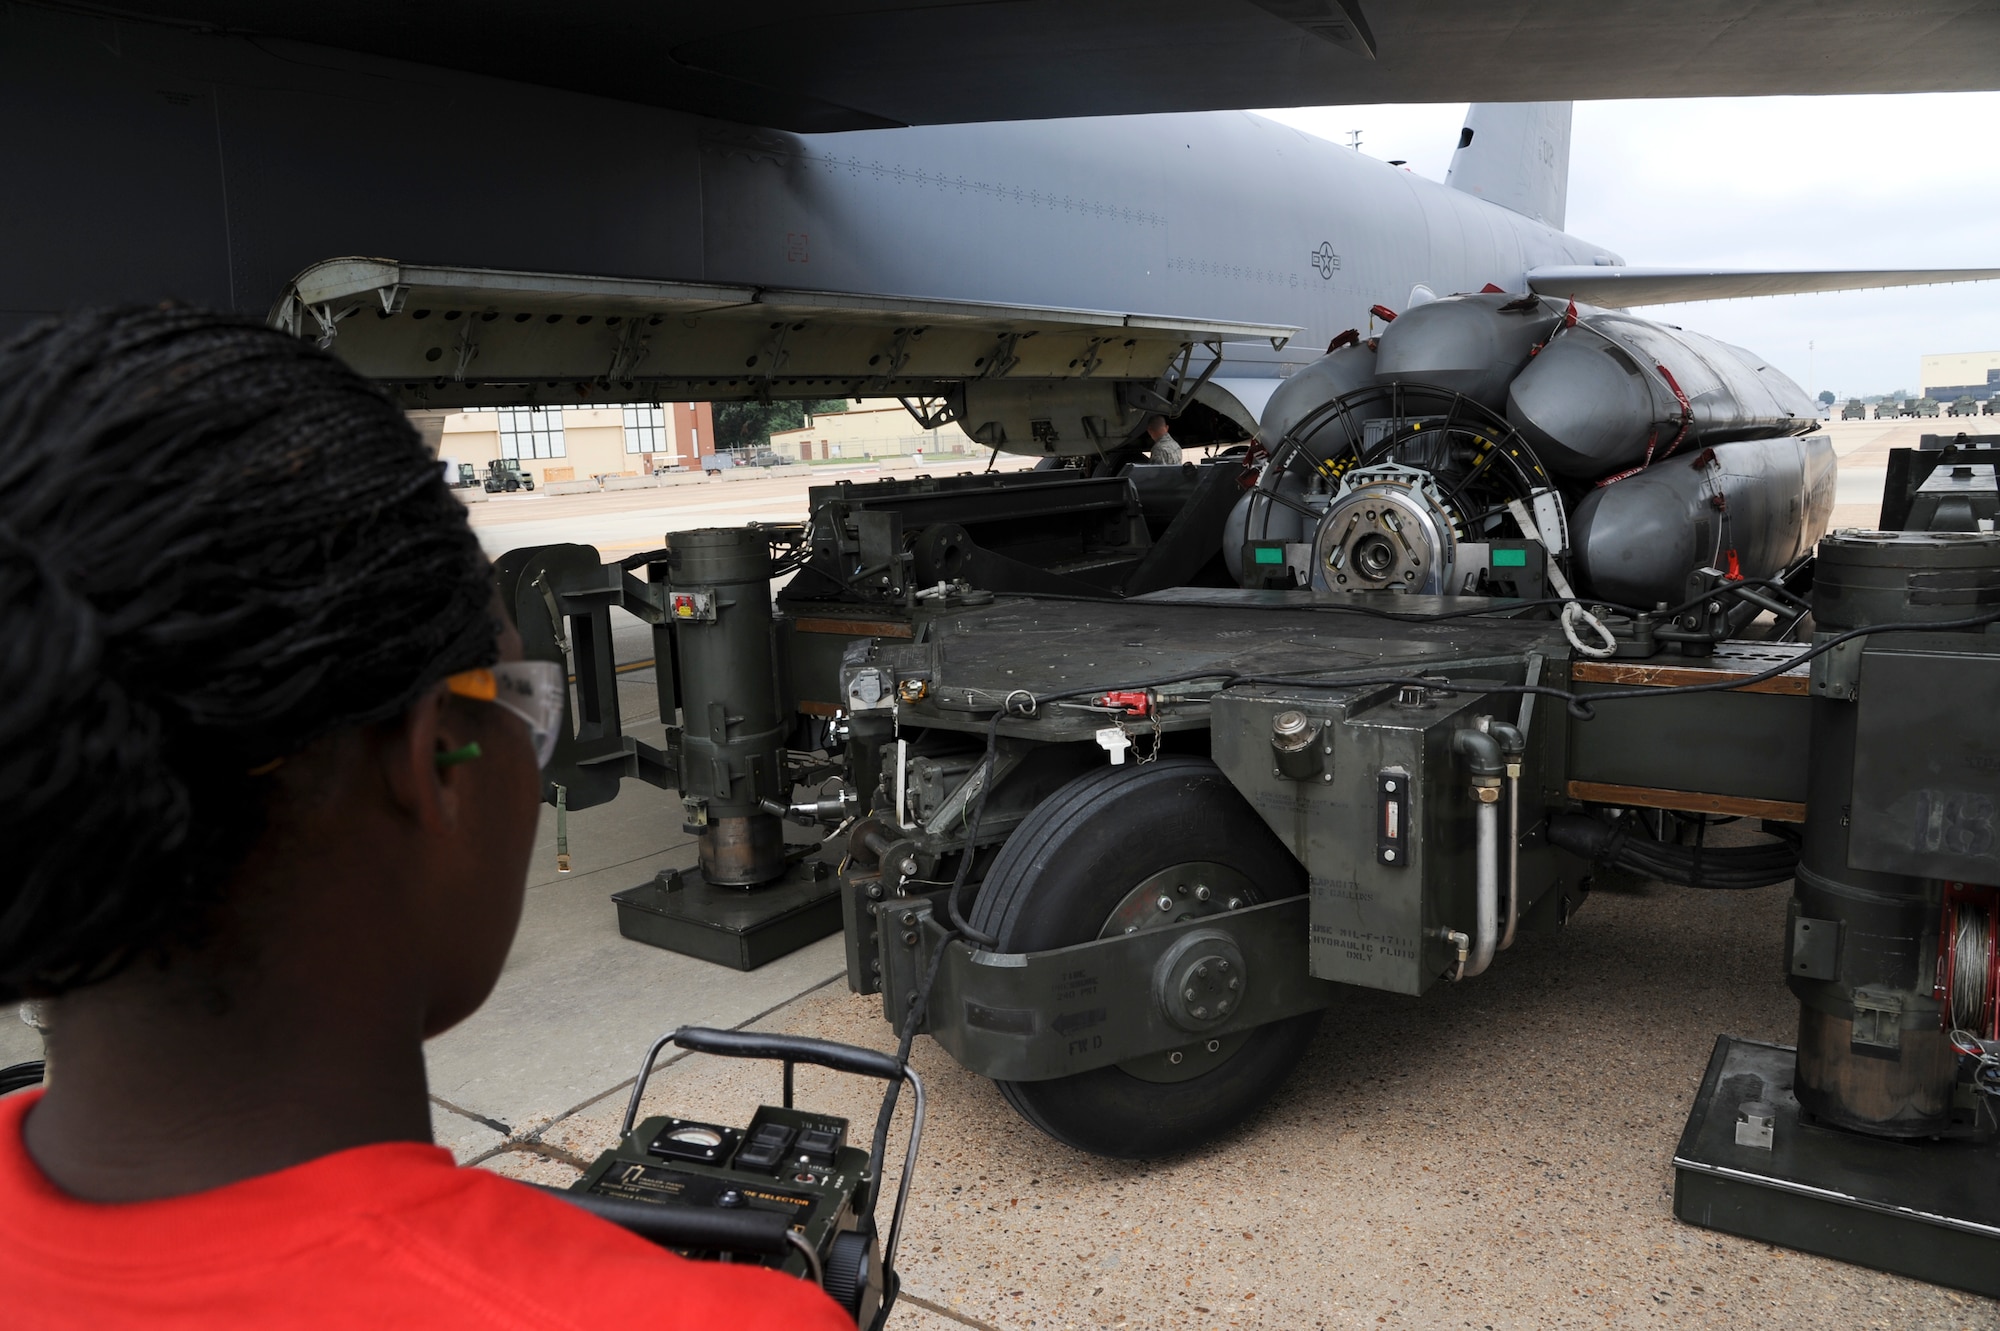 Senior Airman Breyana Anderson, 96th Aircraft Maintenance Unit weapons loader, guides a common strategic rotary launcher under the bomb bay of a B-52H Stratofortress during a weapons load competition on Barksdale Air Force Base, La., Sept. 19, 2014. The weapon load was part of a competition between load crews from the 96th and 20th AMU. (U.S. Air Force photo/Senior Airman Jannelle Dickey) 